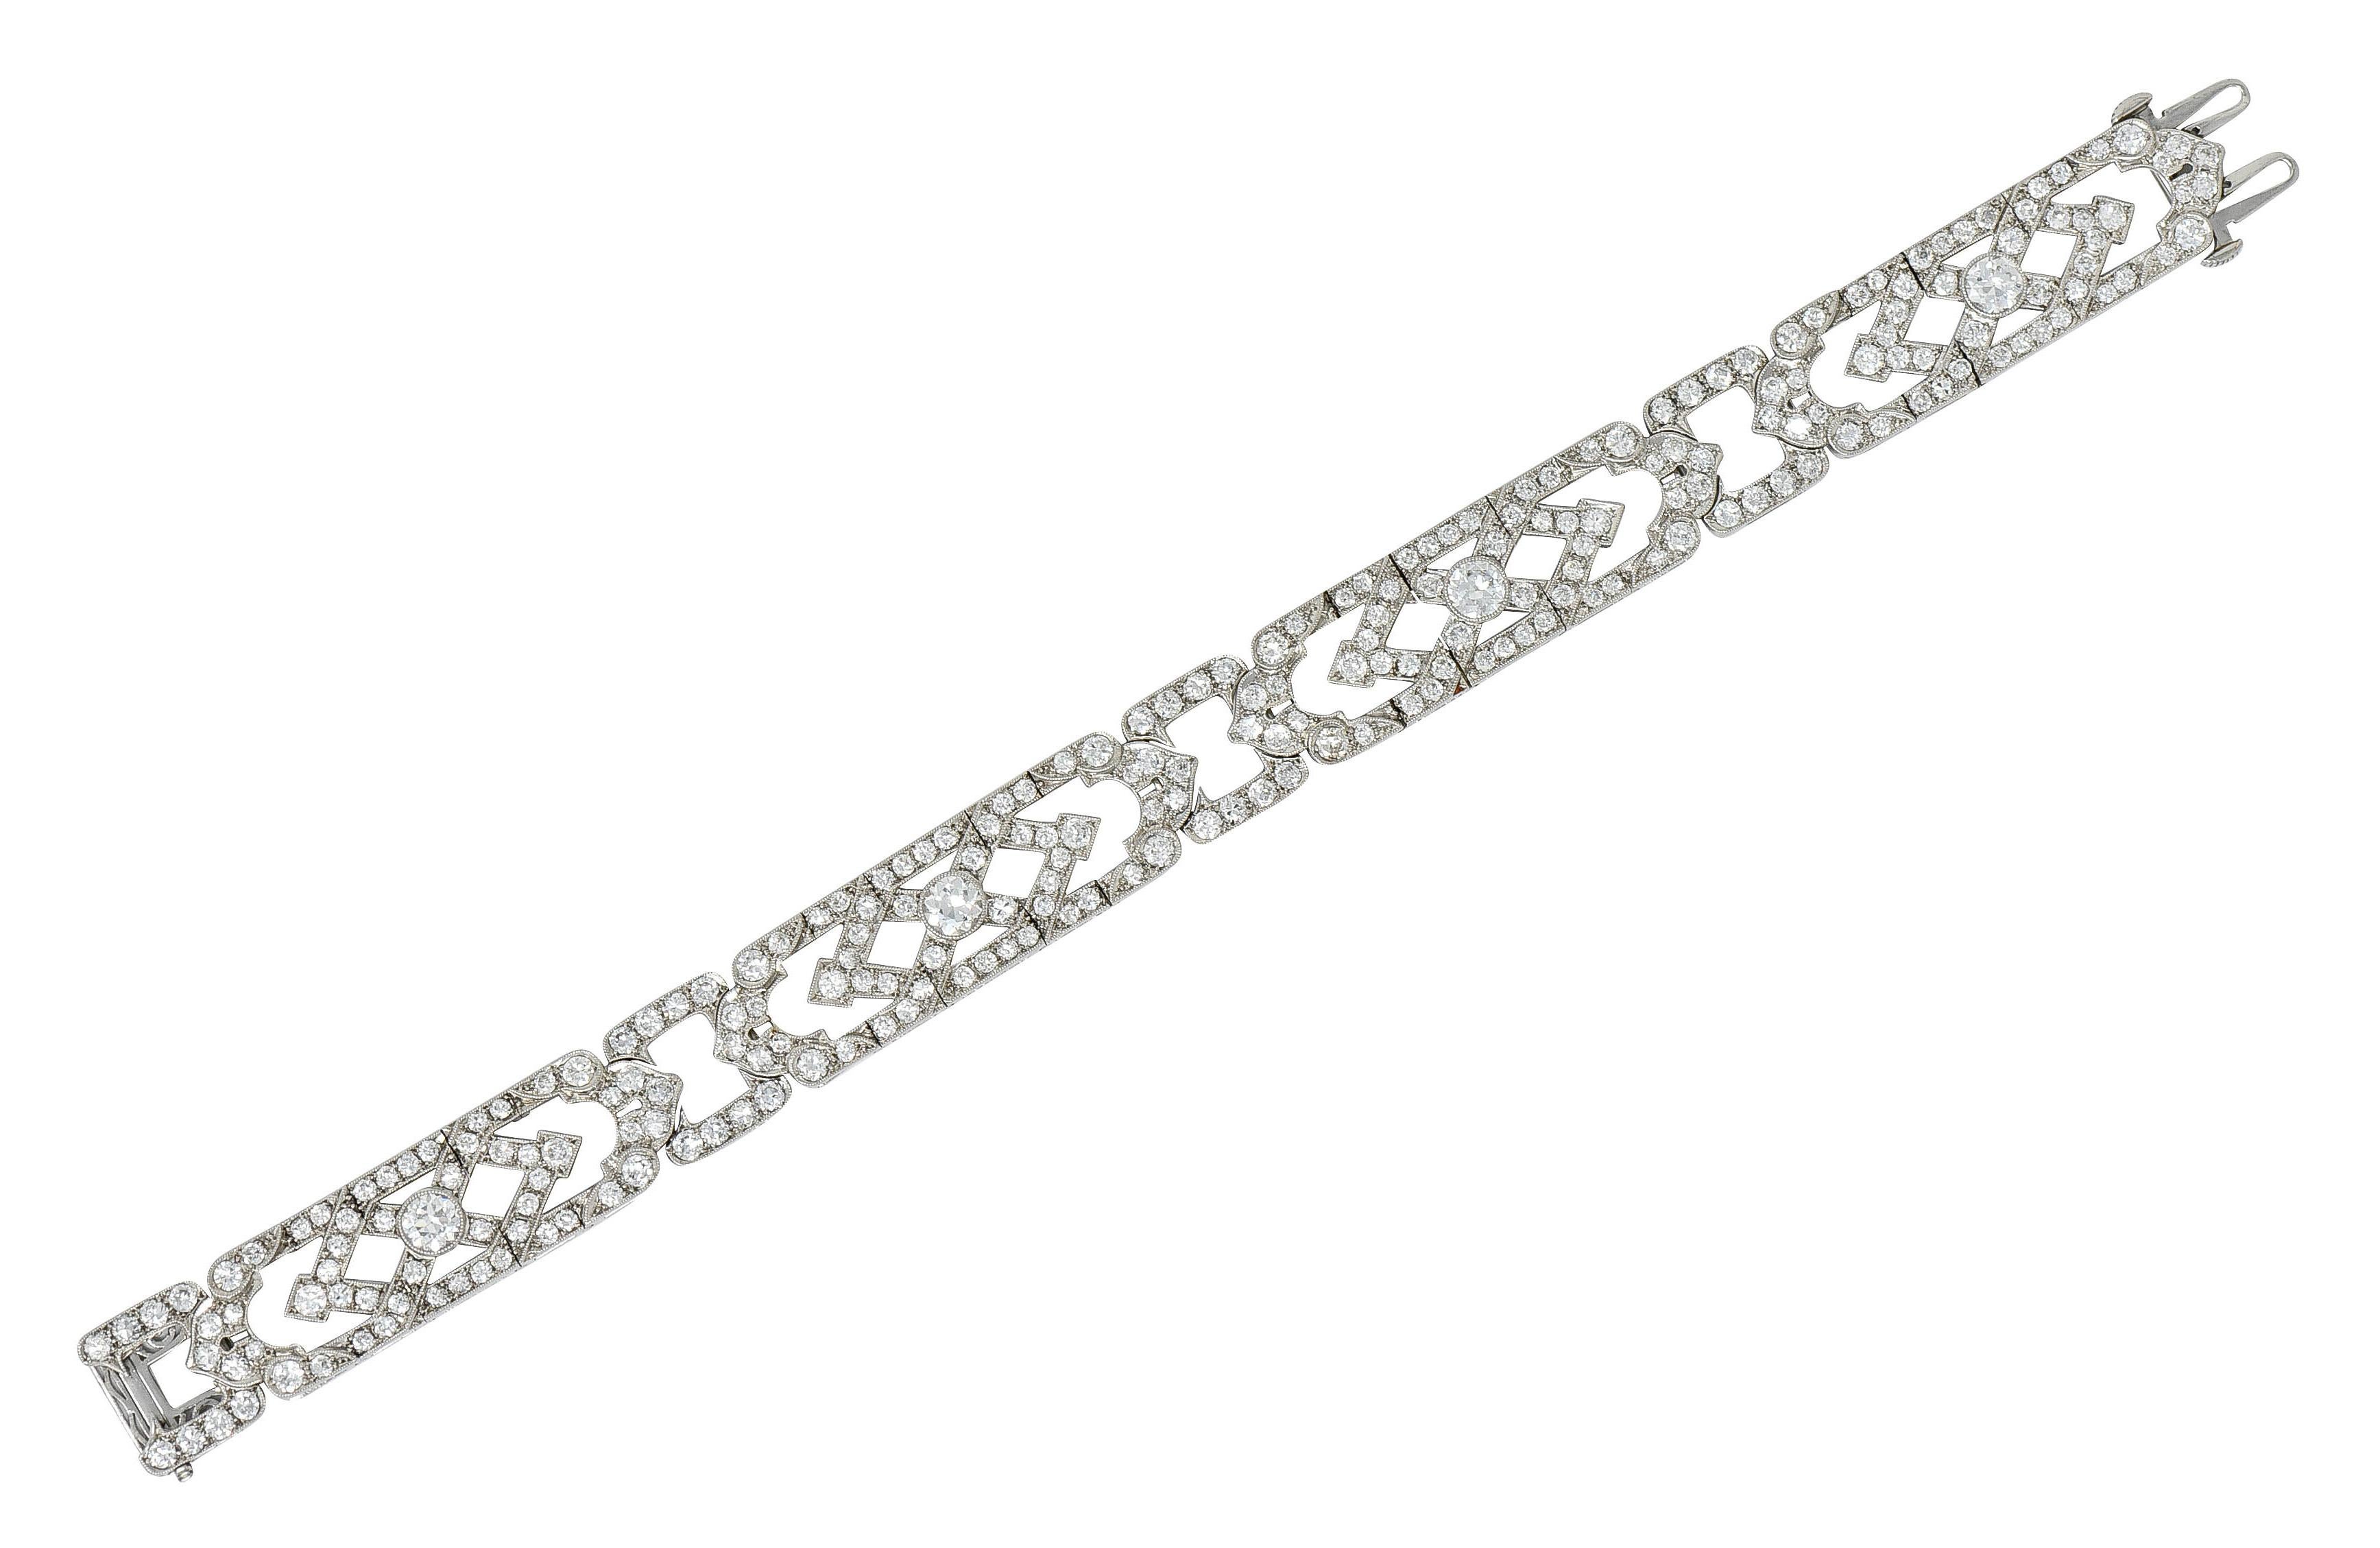 Wide line bracelet features a geometric and overlapping design that alternates with cushion shaped spacer links

With four bezel set transitional cut diamonds weighing in total approximately 1.55 carats - H to J color with VS clarity

Surrounded by